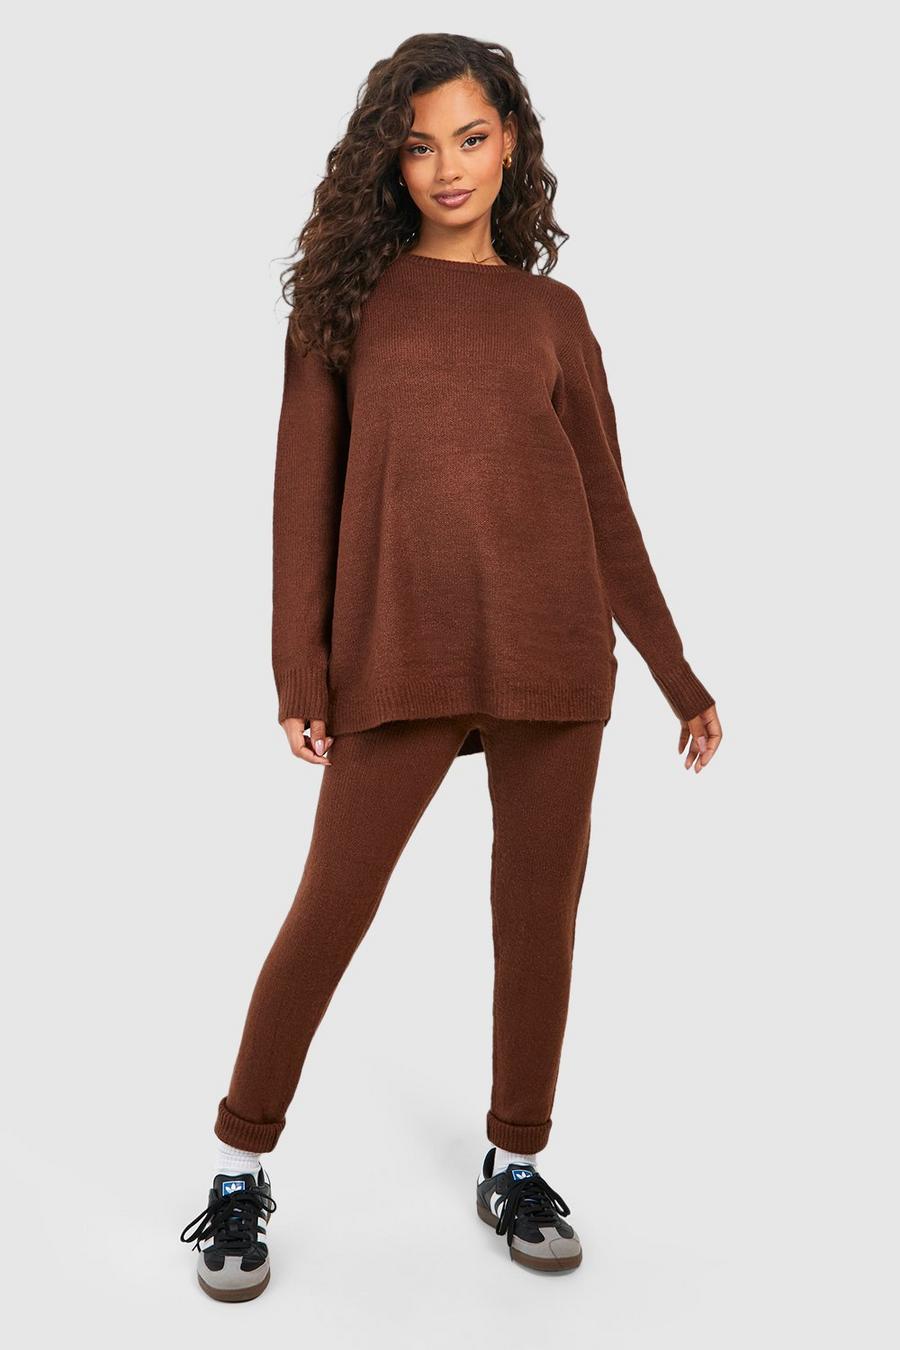 Brown Soft Knit Crew Neck Jumper & Pants Co-Ord